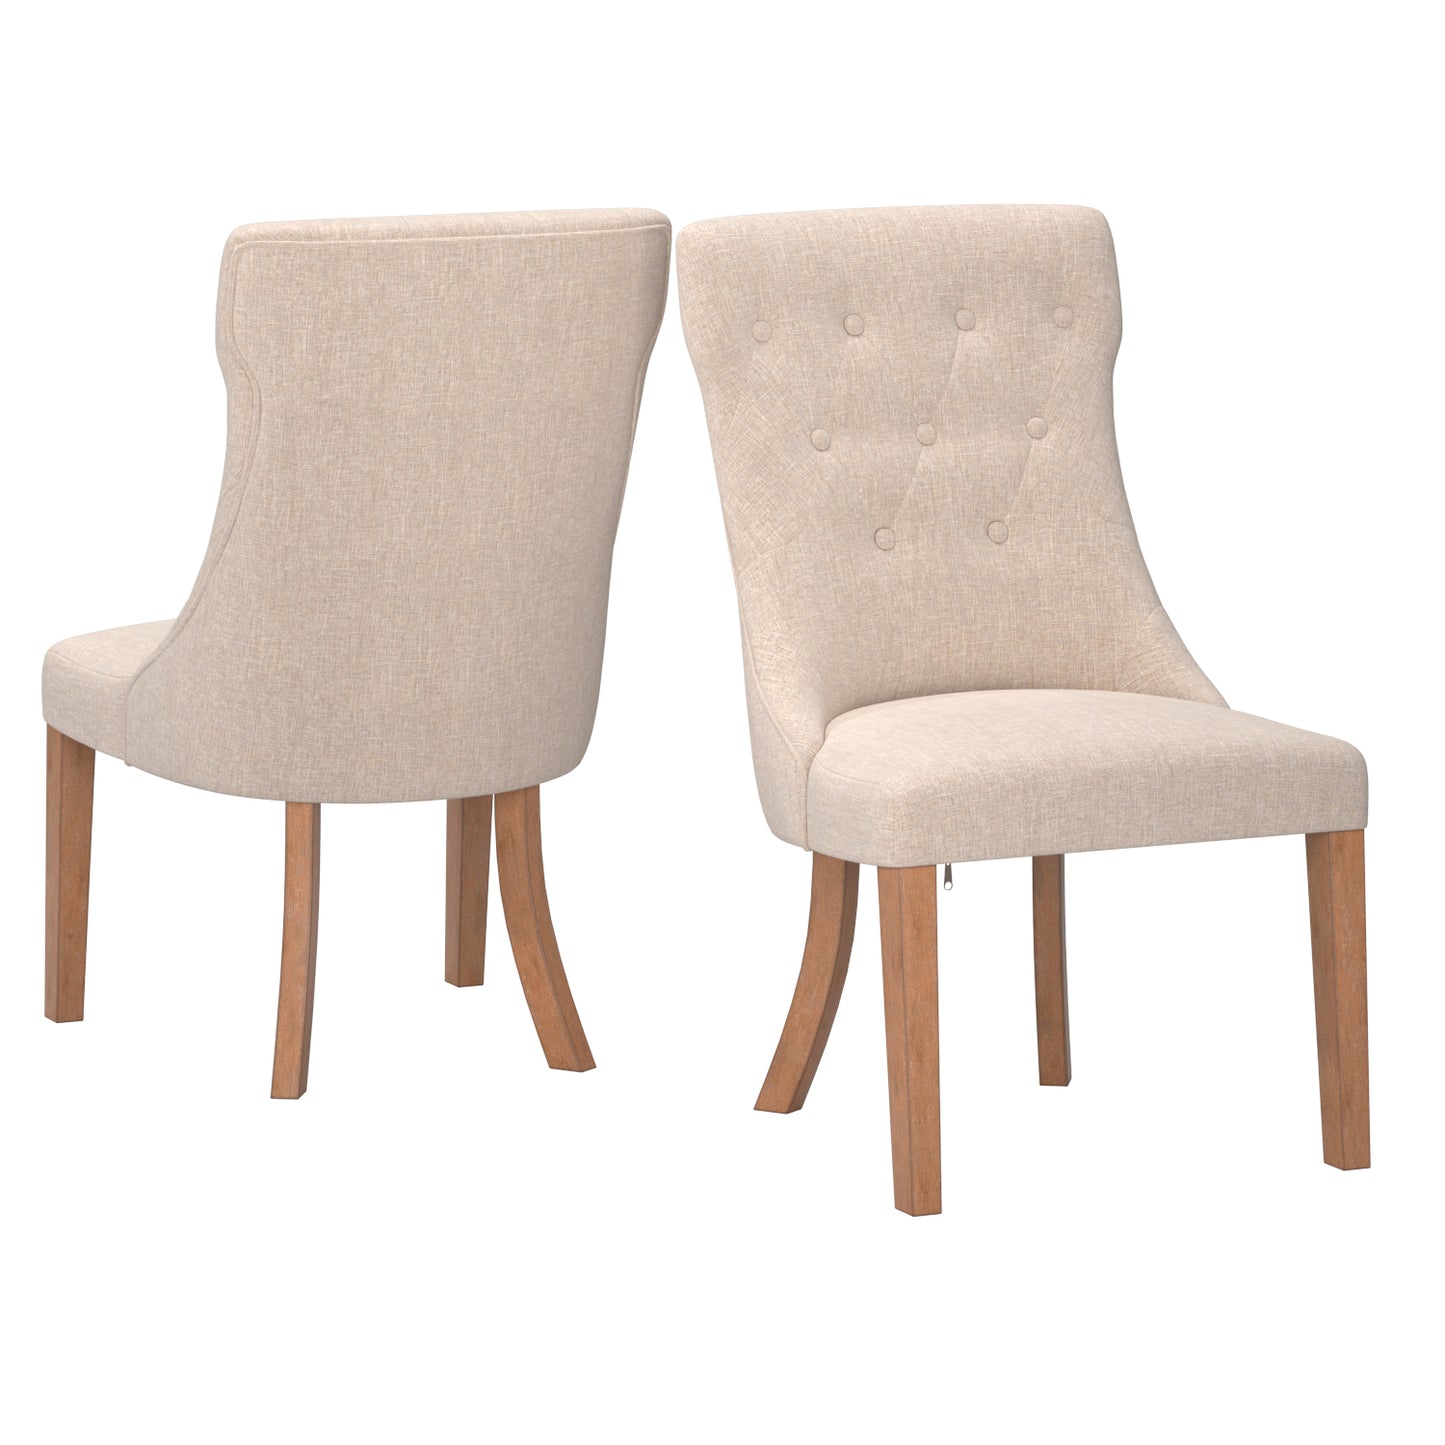 Button Tufted Dining Chairs (Set of 2) - Beige Linen, Natural Finish